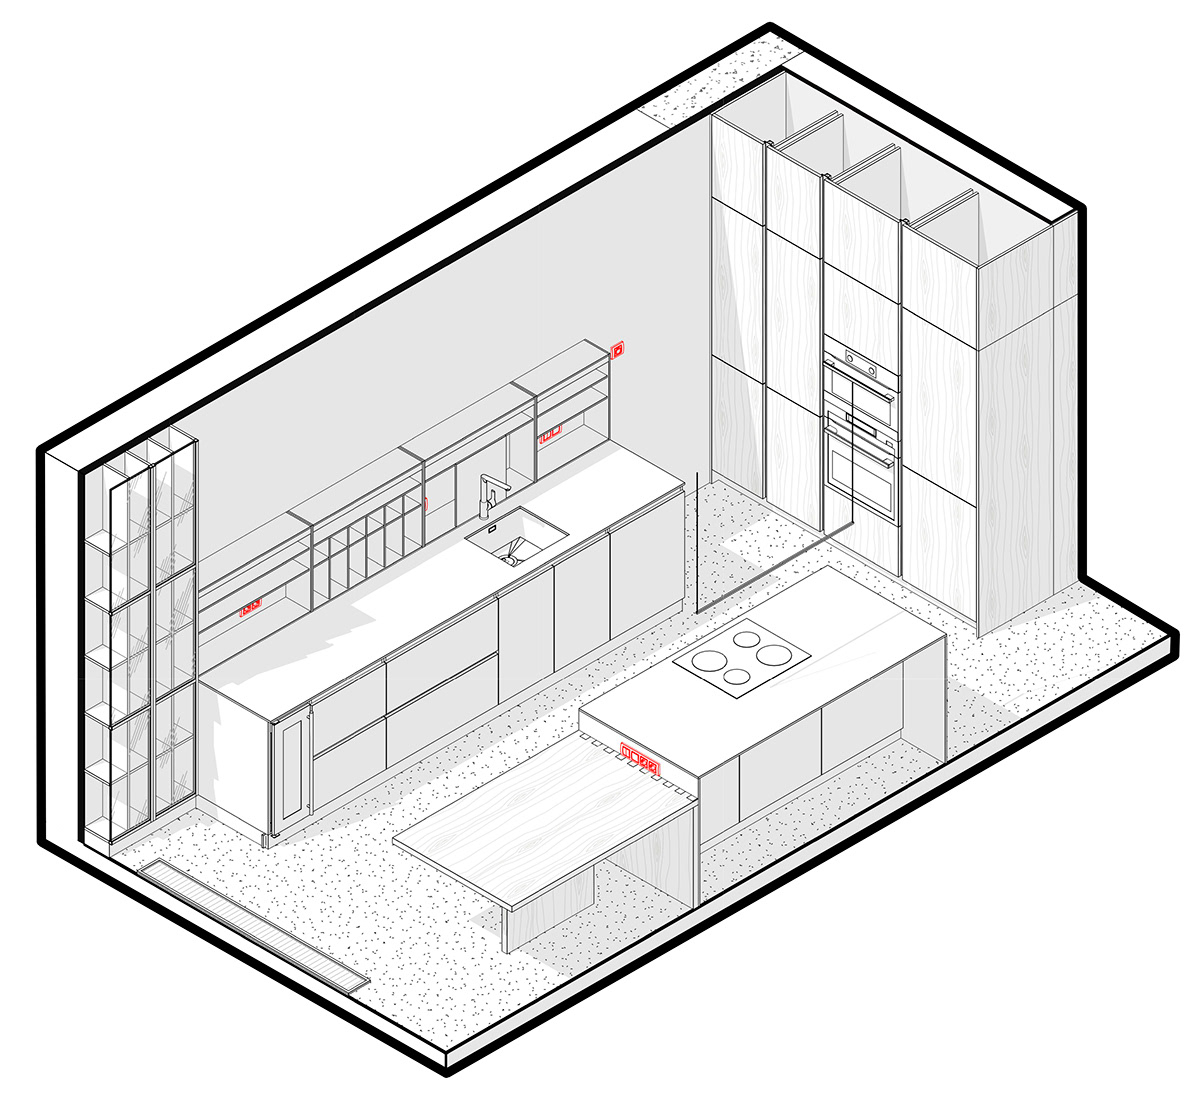 The 3D layout of the kitchen